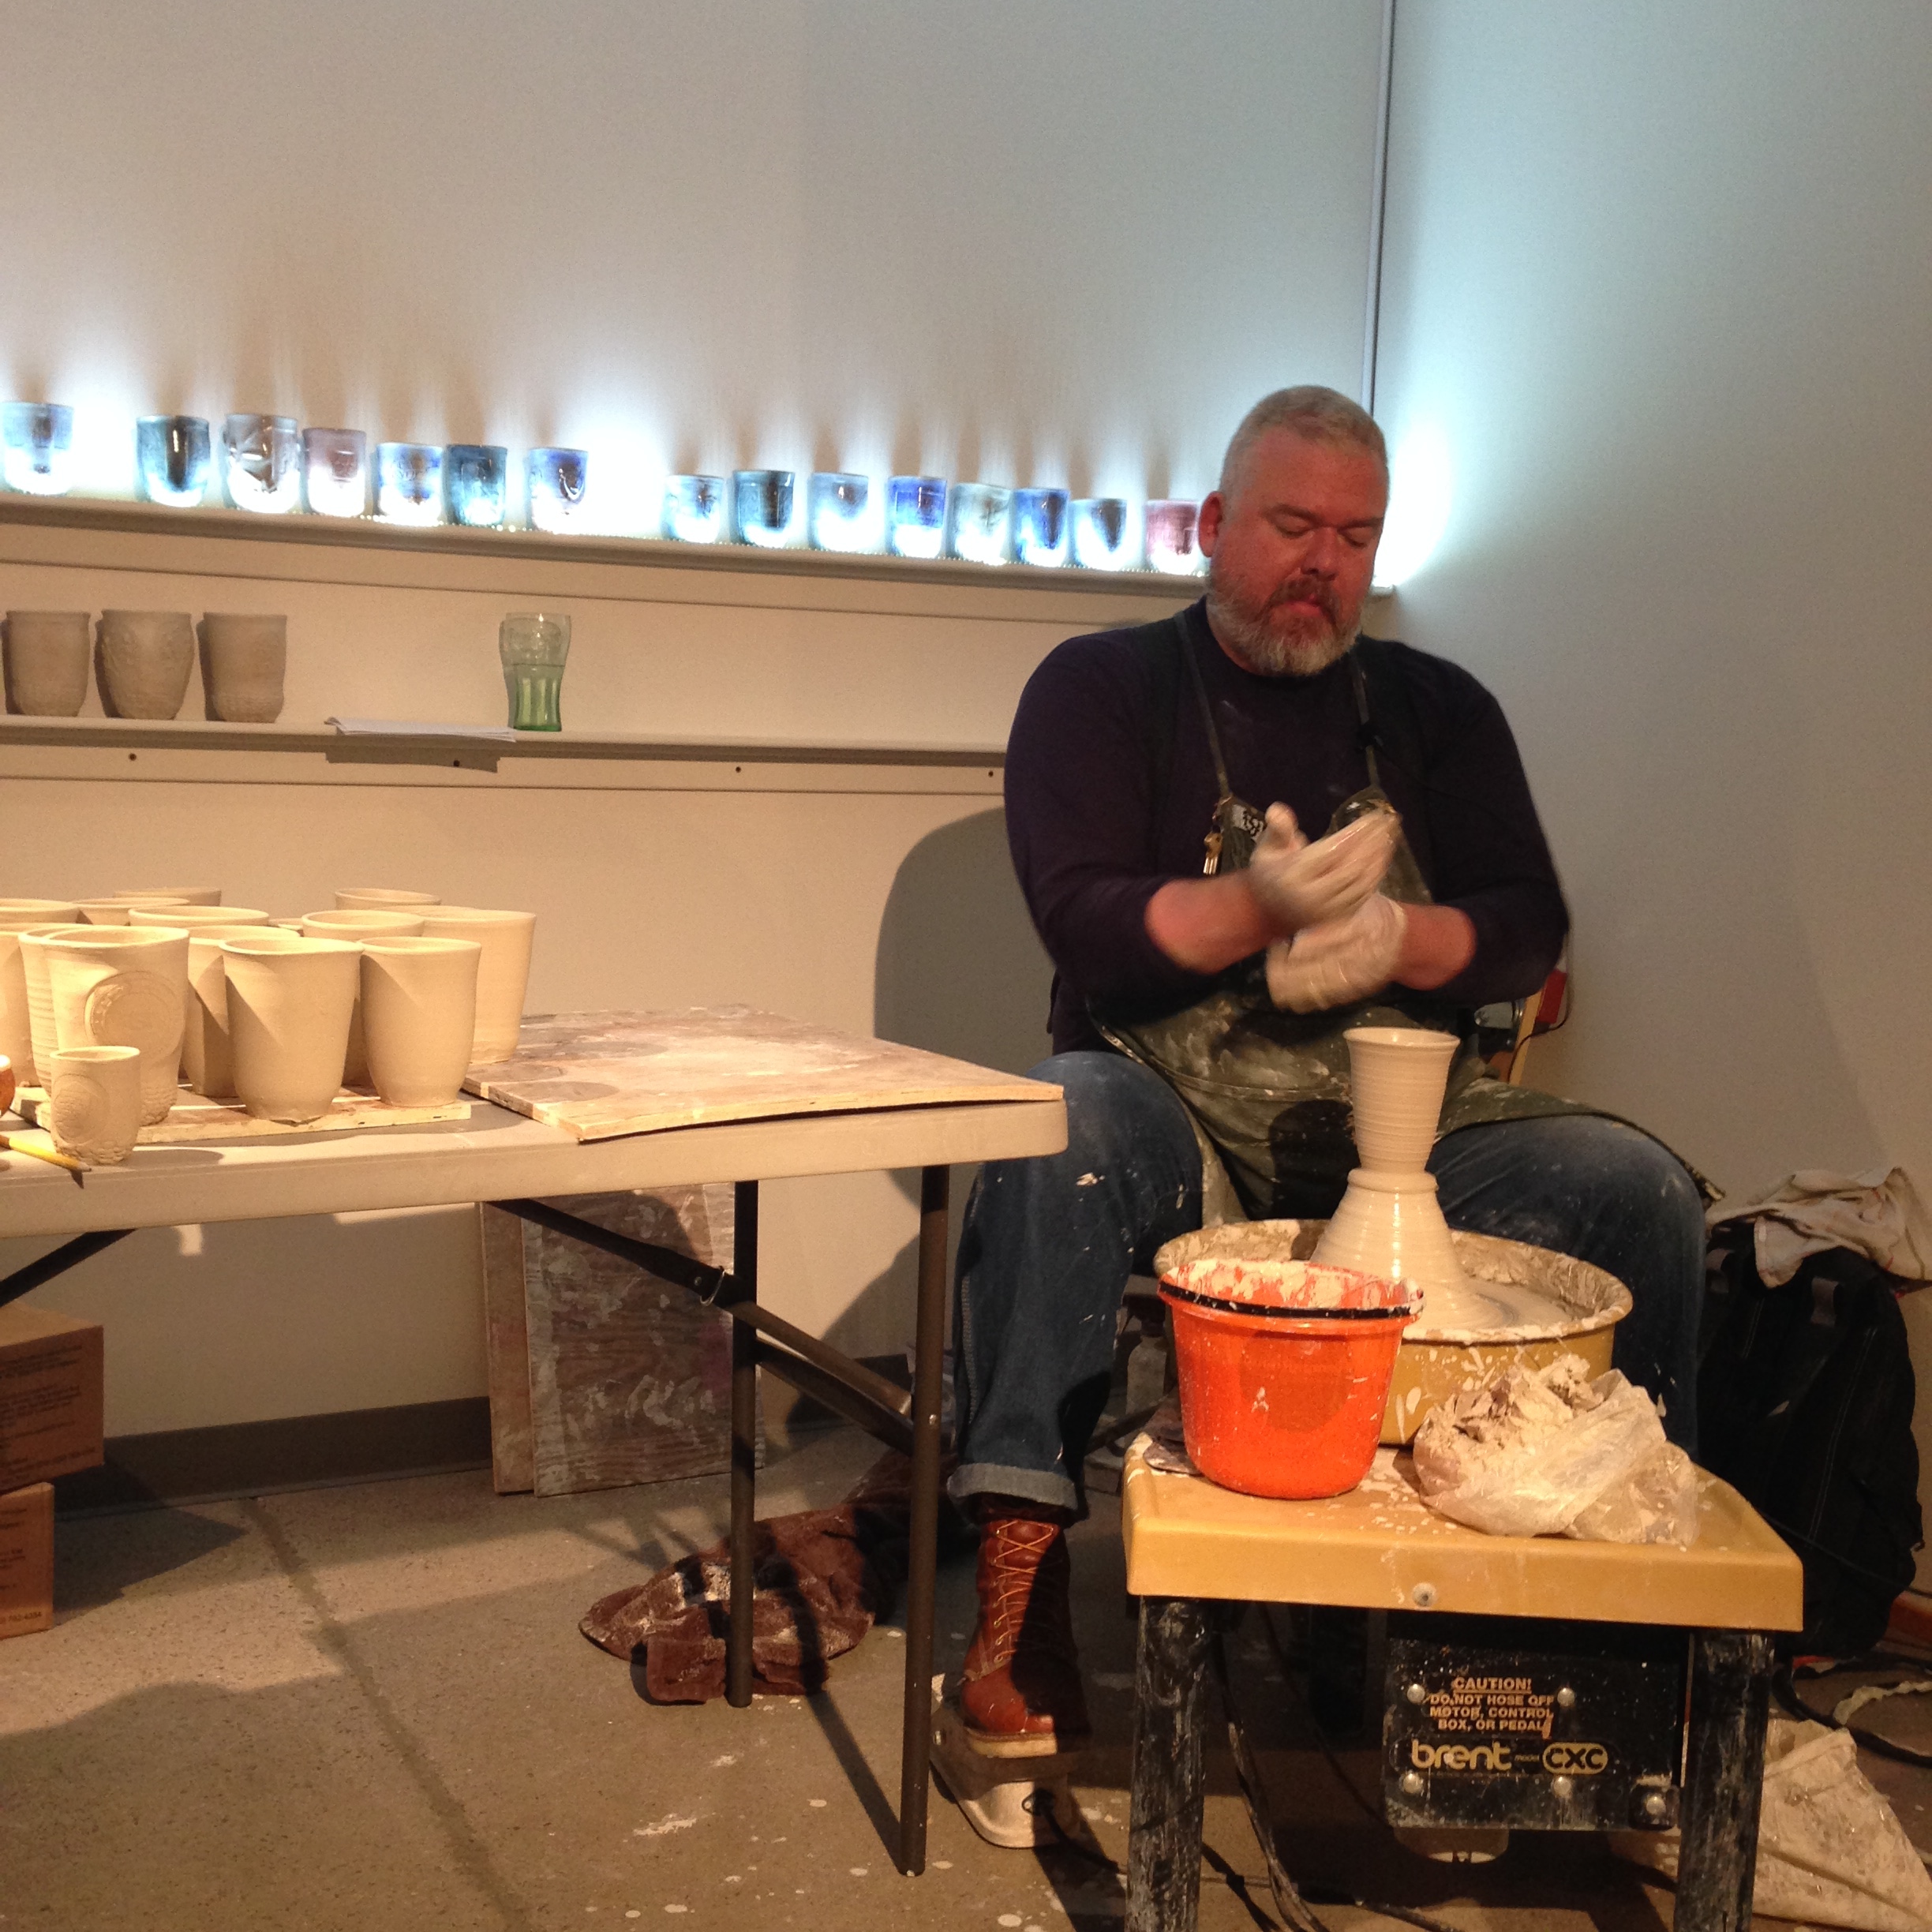 Ehren Tool treated us to a show--he made several cups on site out of a 25lb. block of clay!